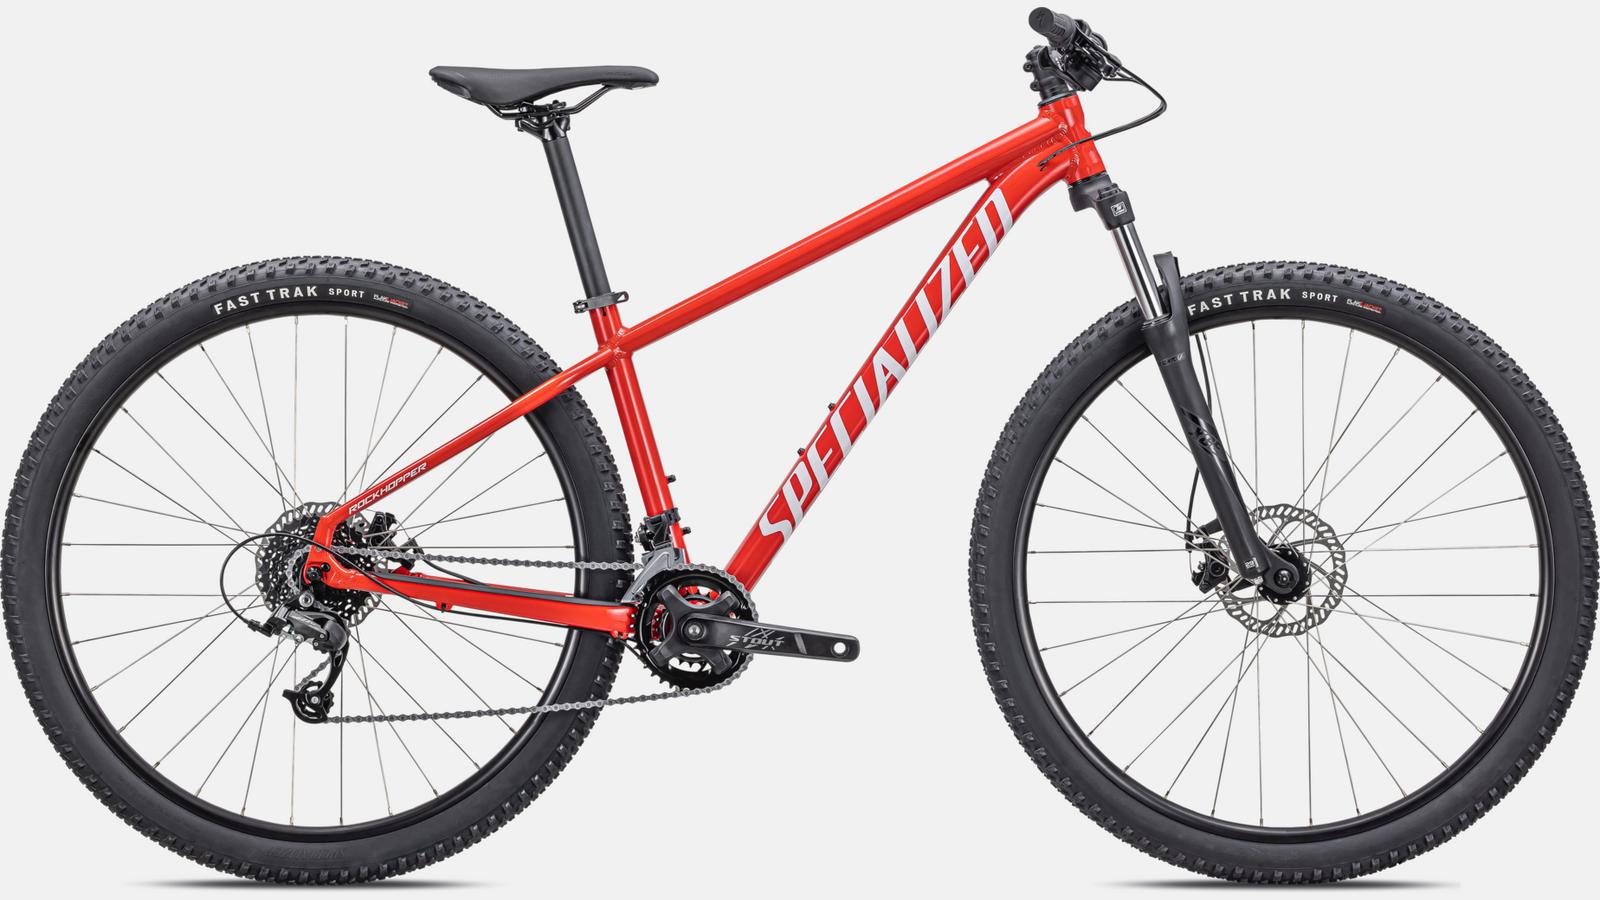 Paint for 2022 Specialized Rockhopper 26 - Gloss Flo Red